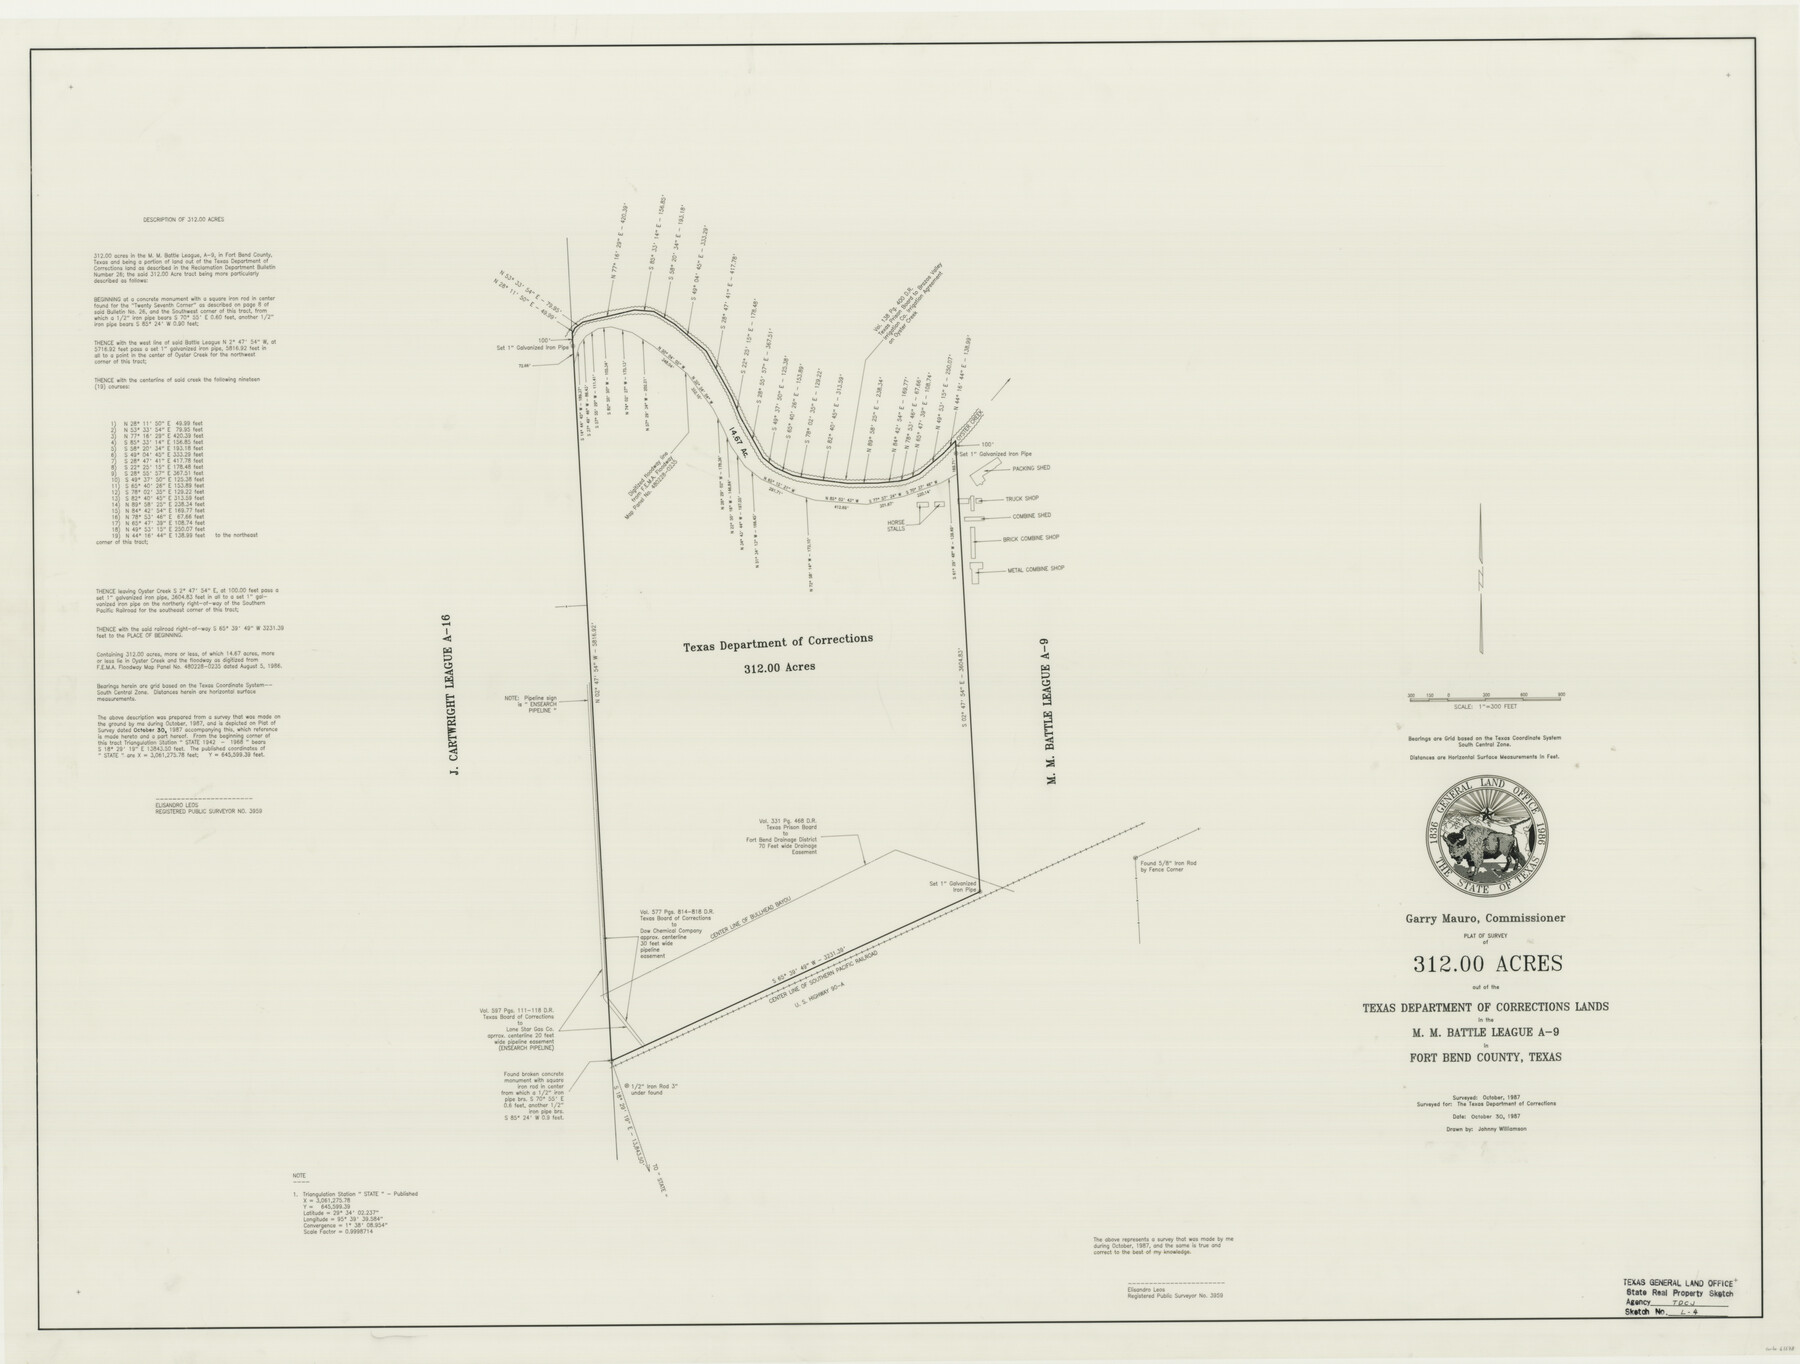 61678, Fort Bend County State Real Property Sketch 4, General Map Collection